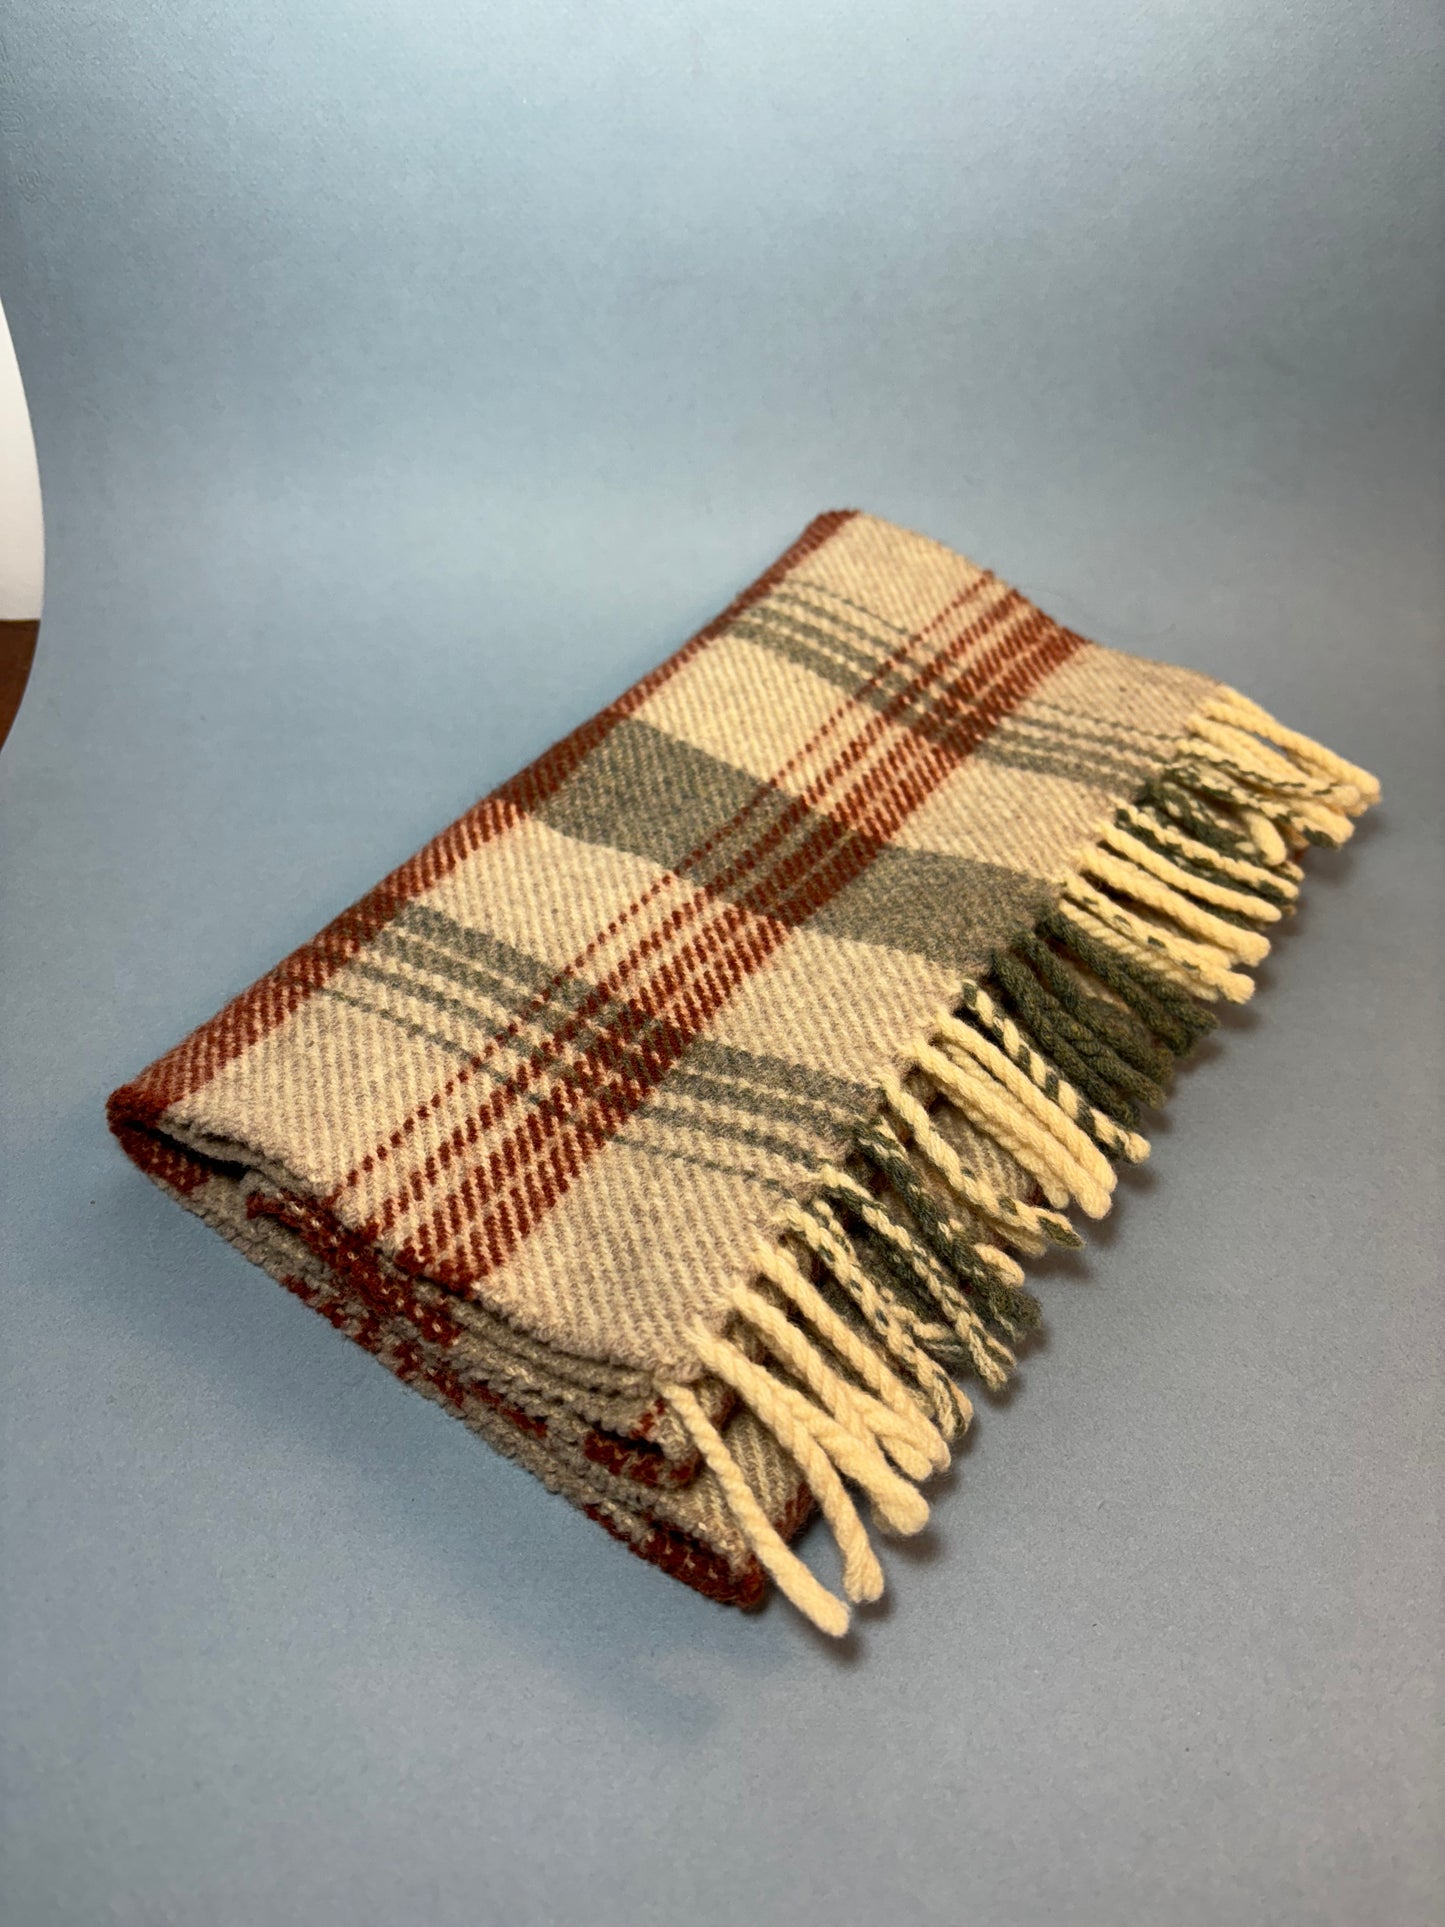 50's "Marvelous Mrs. Maisel" Grey Taupe Brown Plaid Harrods Scarf